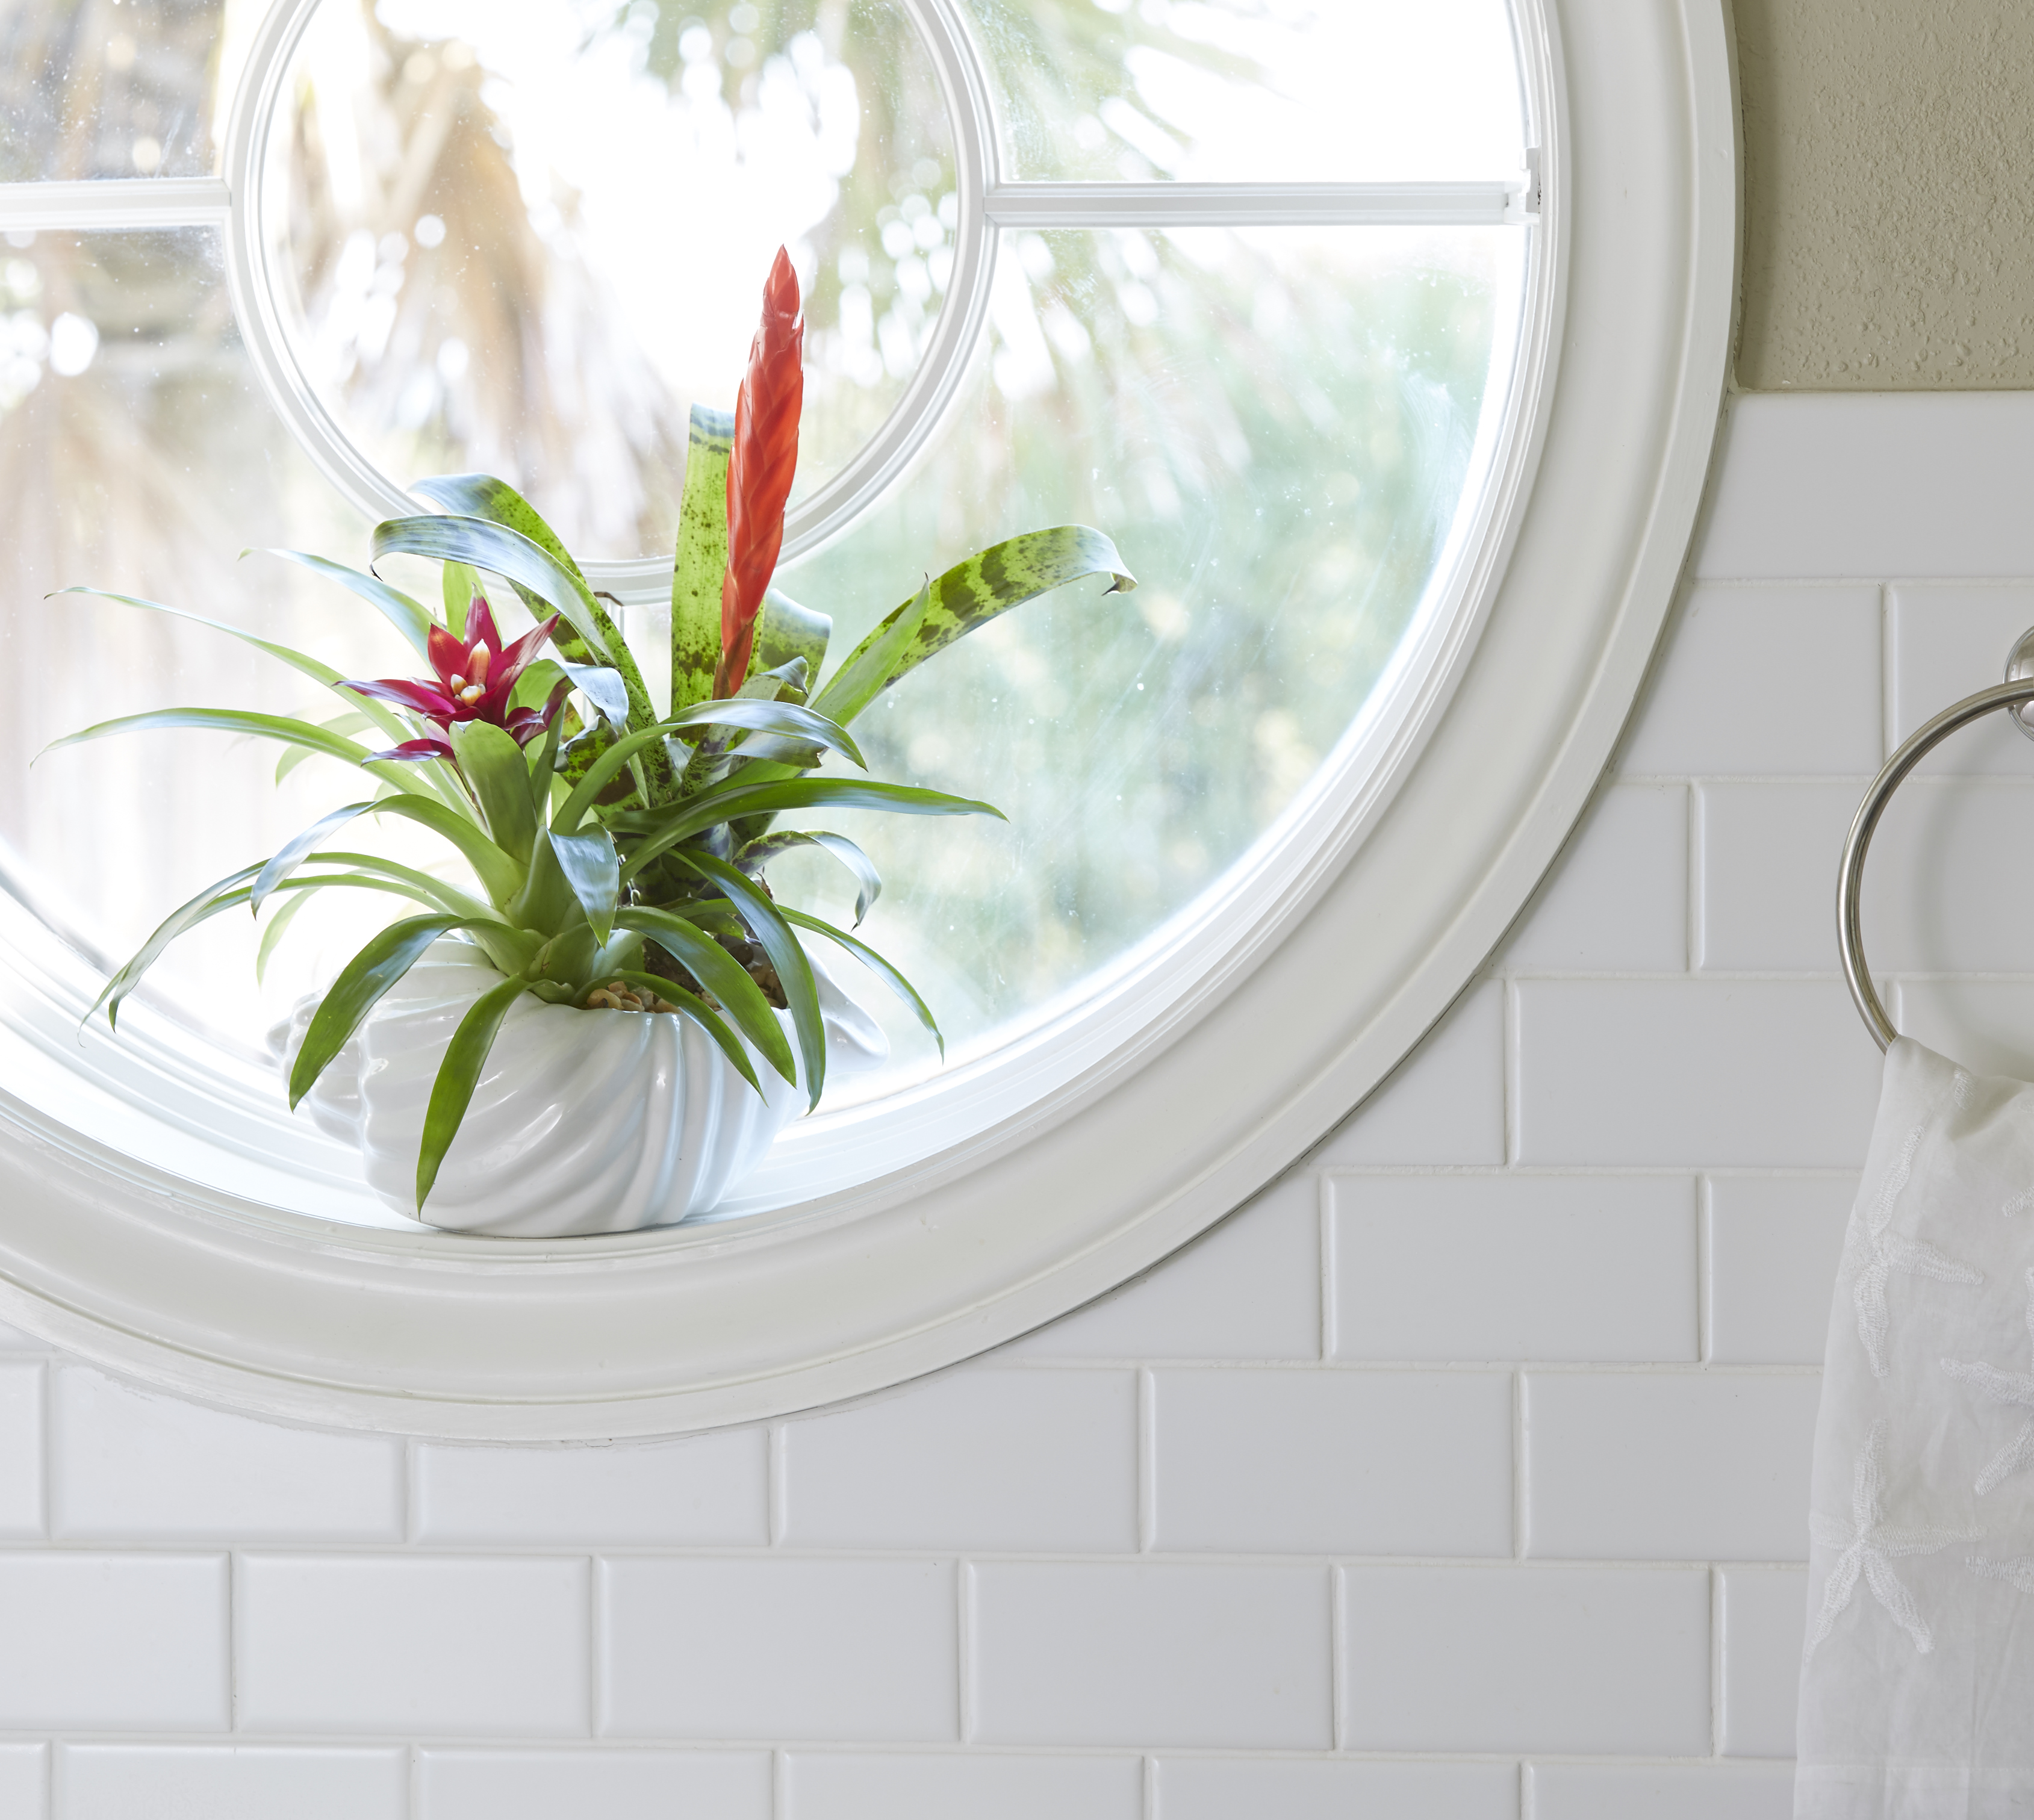 Common houseplants such as bromeliads, dracaenas, and spider plants efficiently absorb the harmful compounds frequently found in homes and offices, produced by such products as cleaning supplies, pain